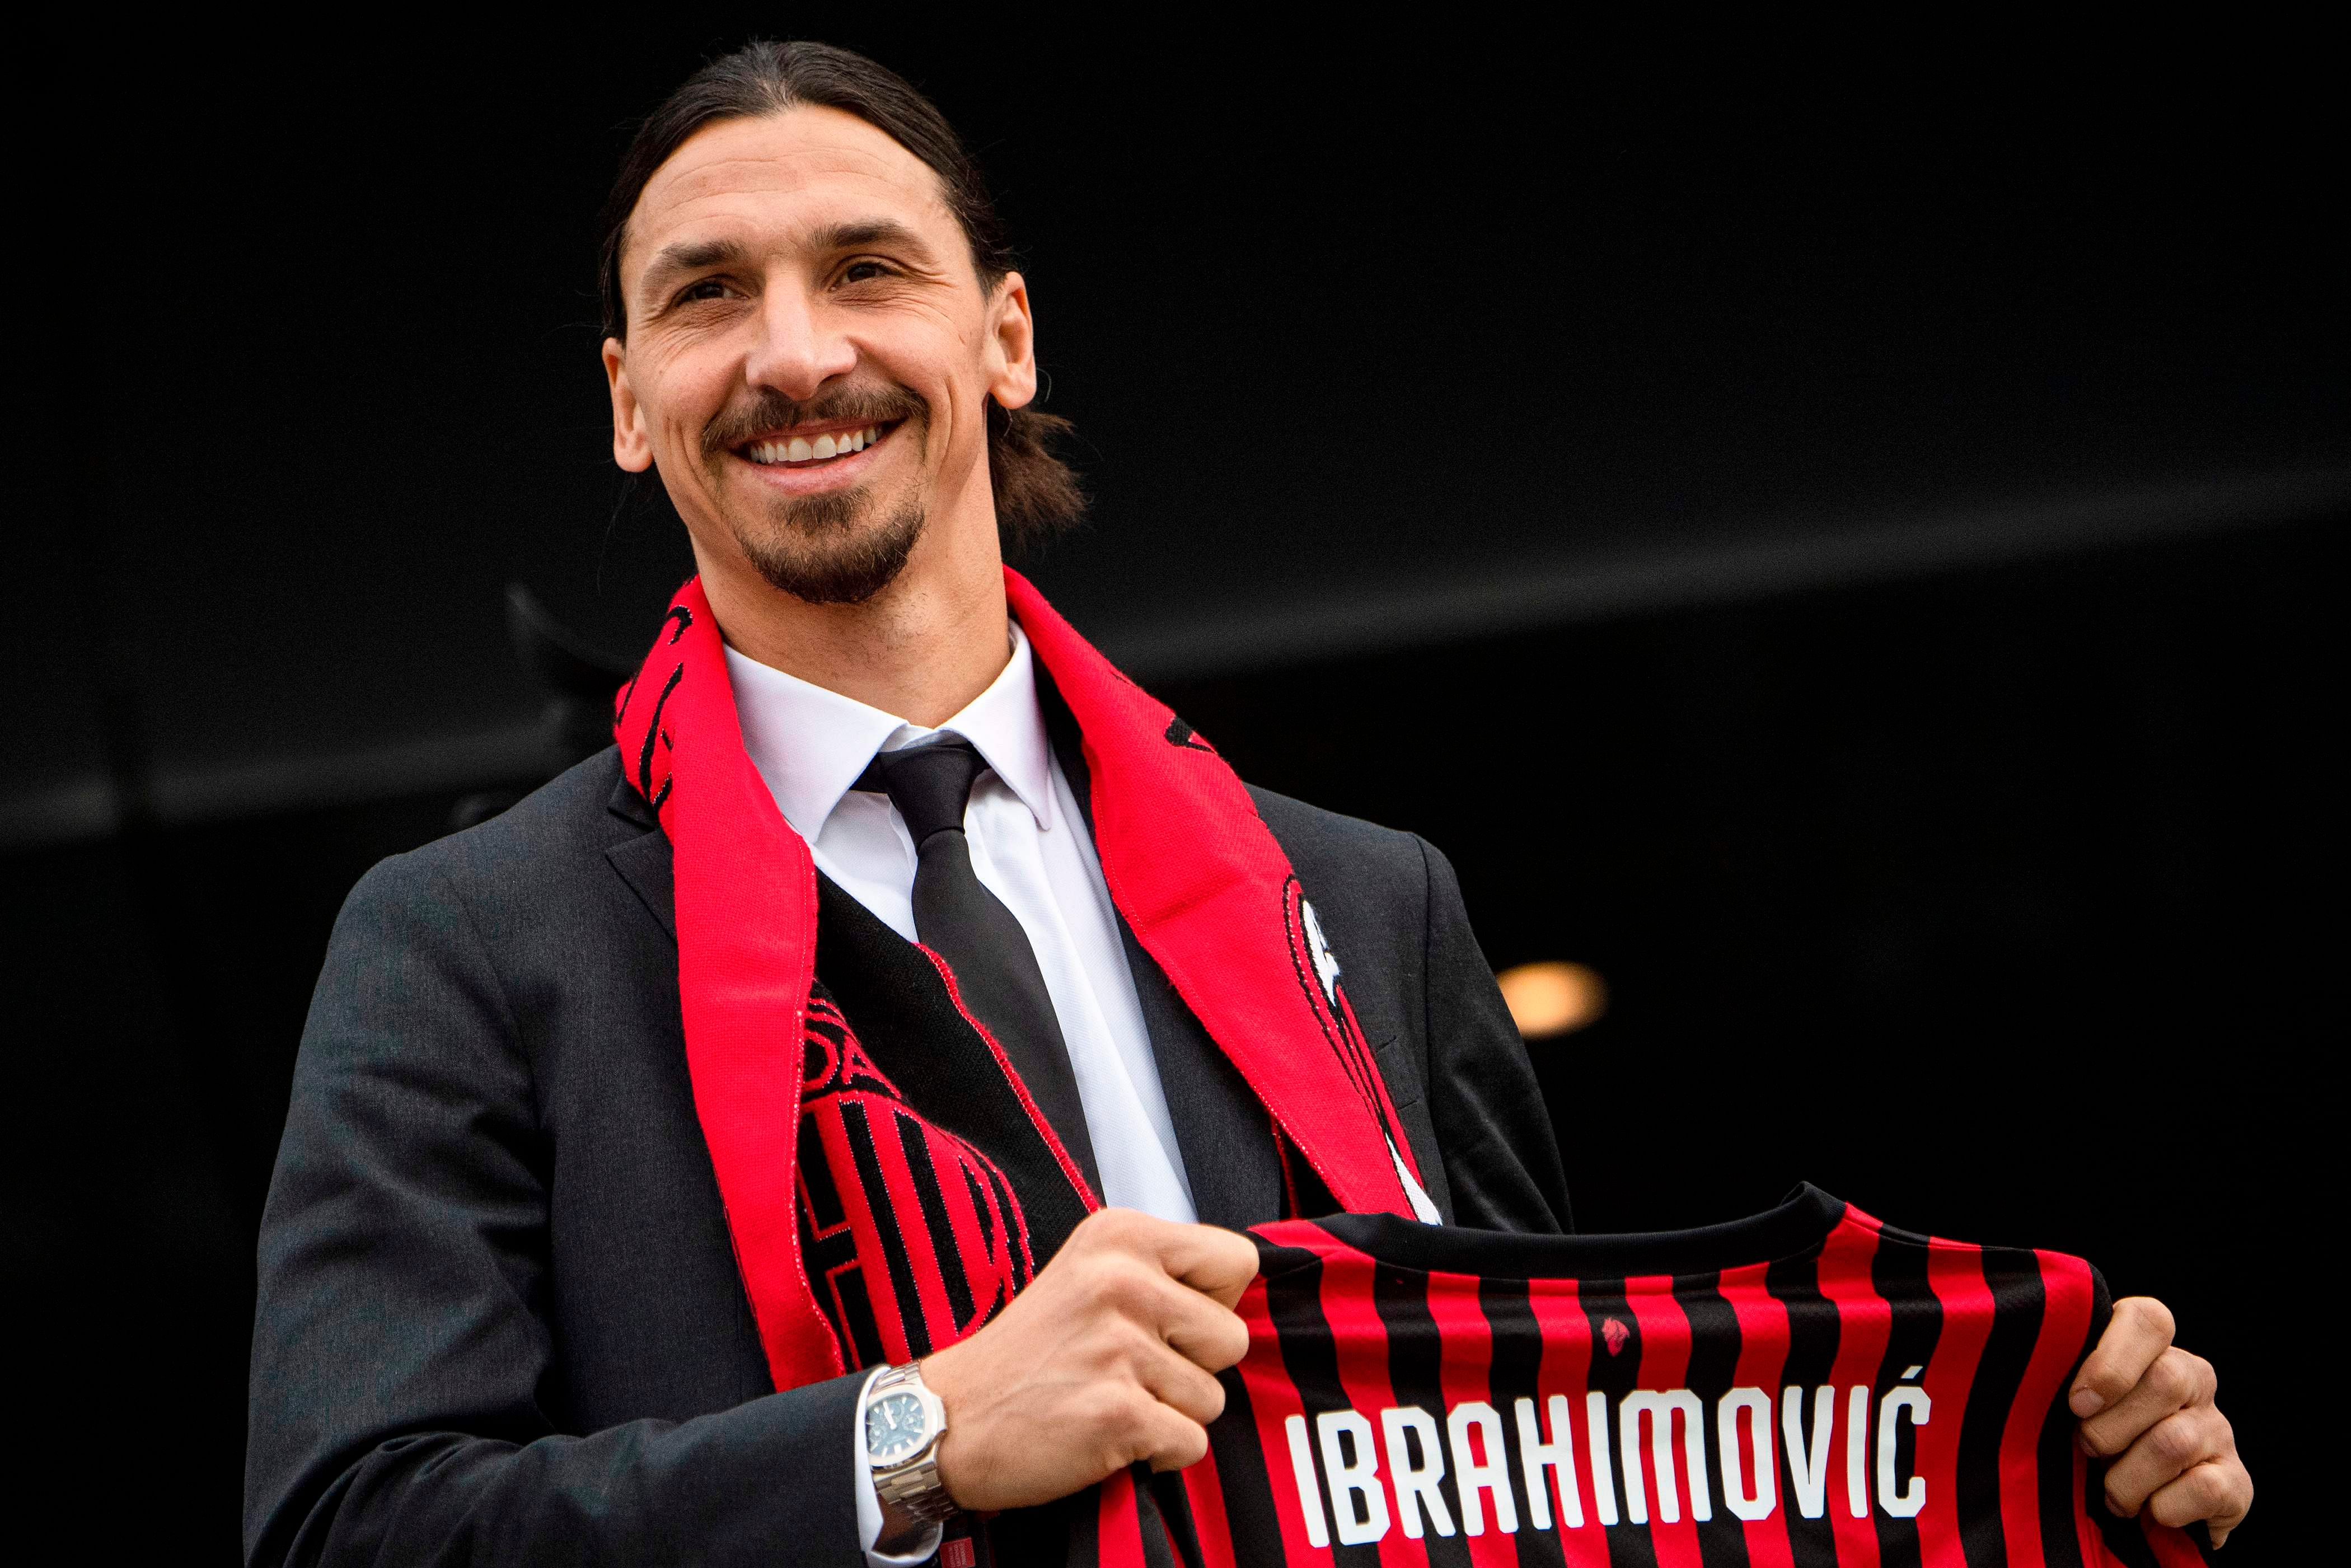 Milan's Swedish forward Zlatan Ibrahimovic poses with his new jersey during his official presentation as new AC Milan player at the club's headquarters Casa Milan in Milan on January 3, 2019. - Ibrahimovic returns to the side on a six-month deal, promising to help rescue the struggling Serie A outfit's season. (AFP Photo)